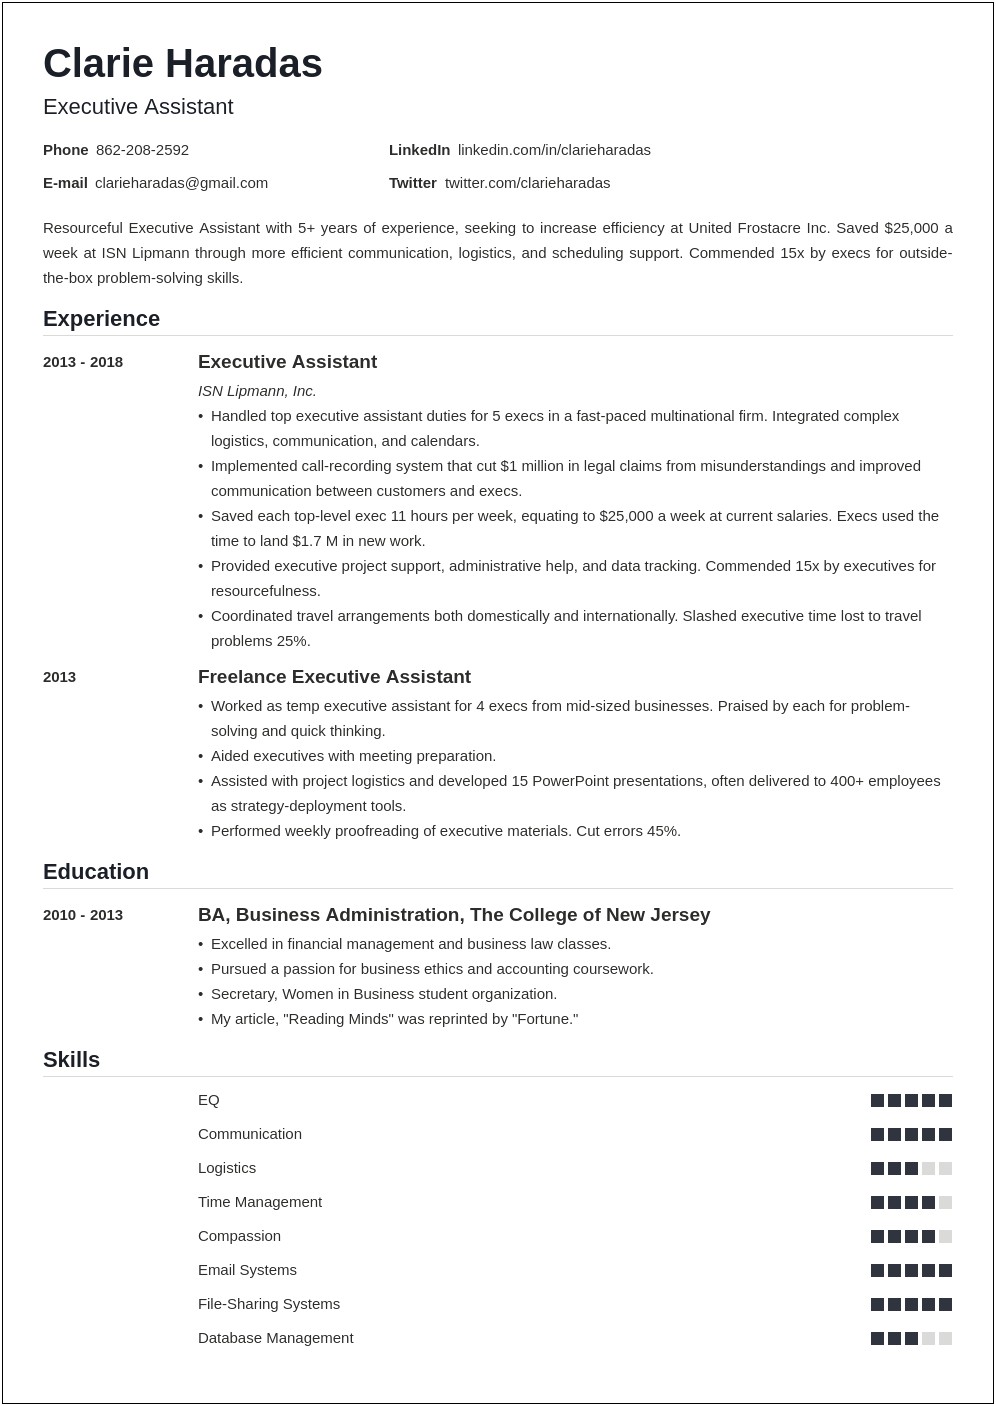 Example Of Format In Making A Resume